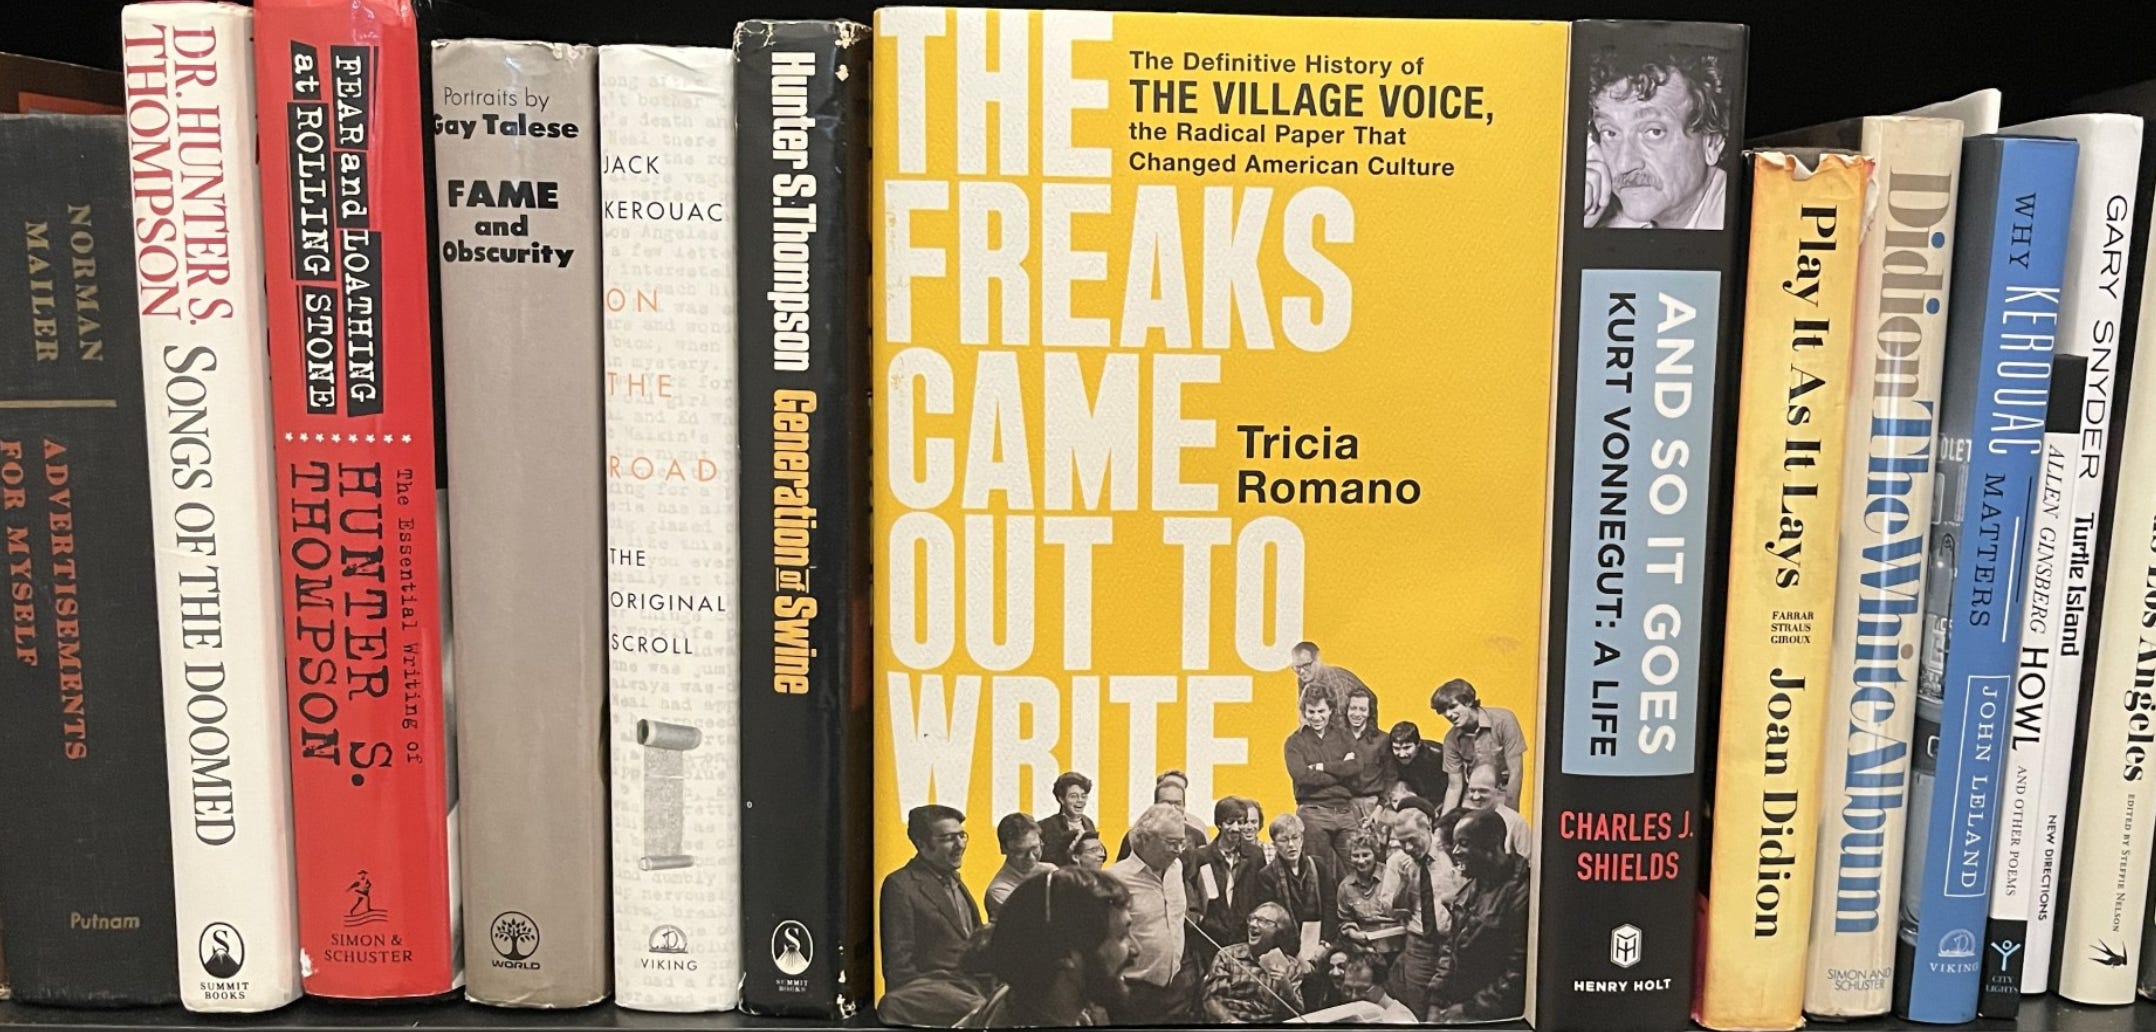 Photo of books on the counterculture